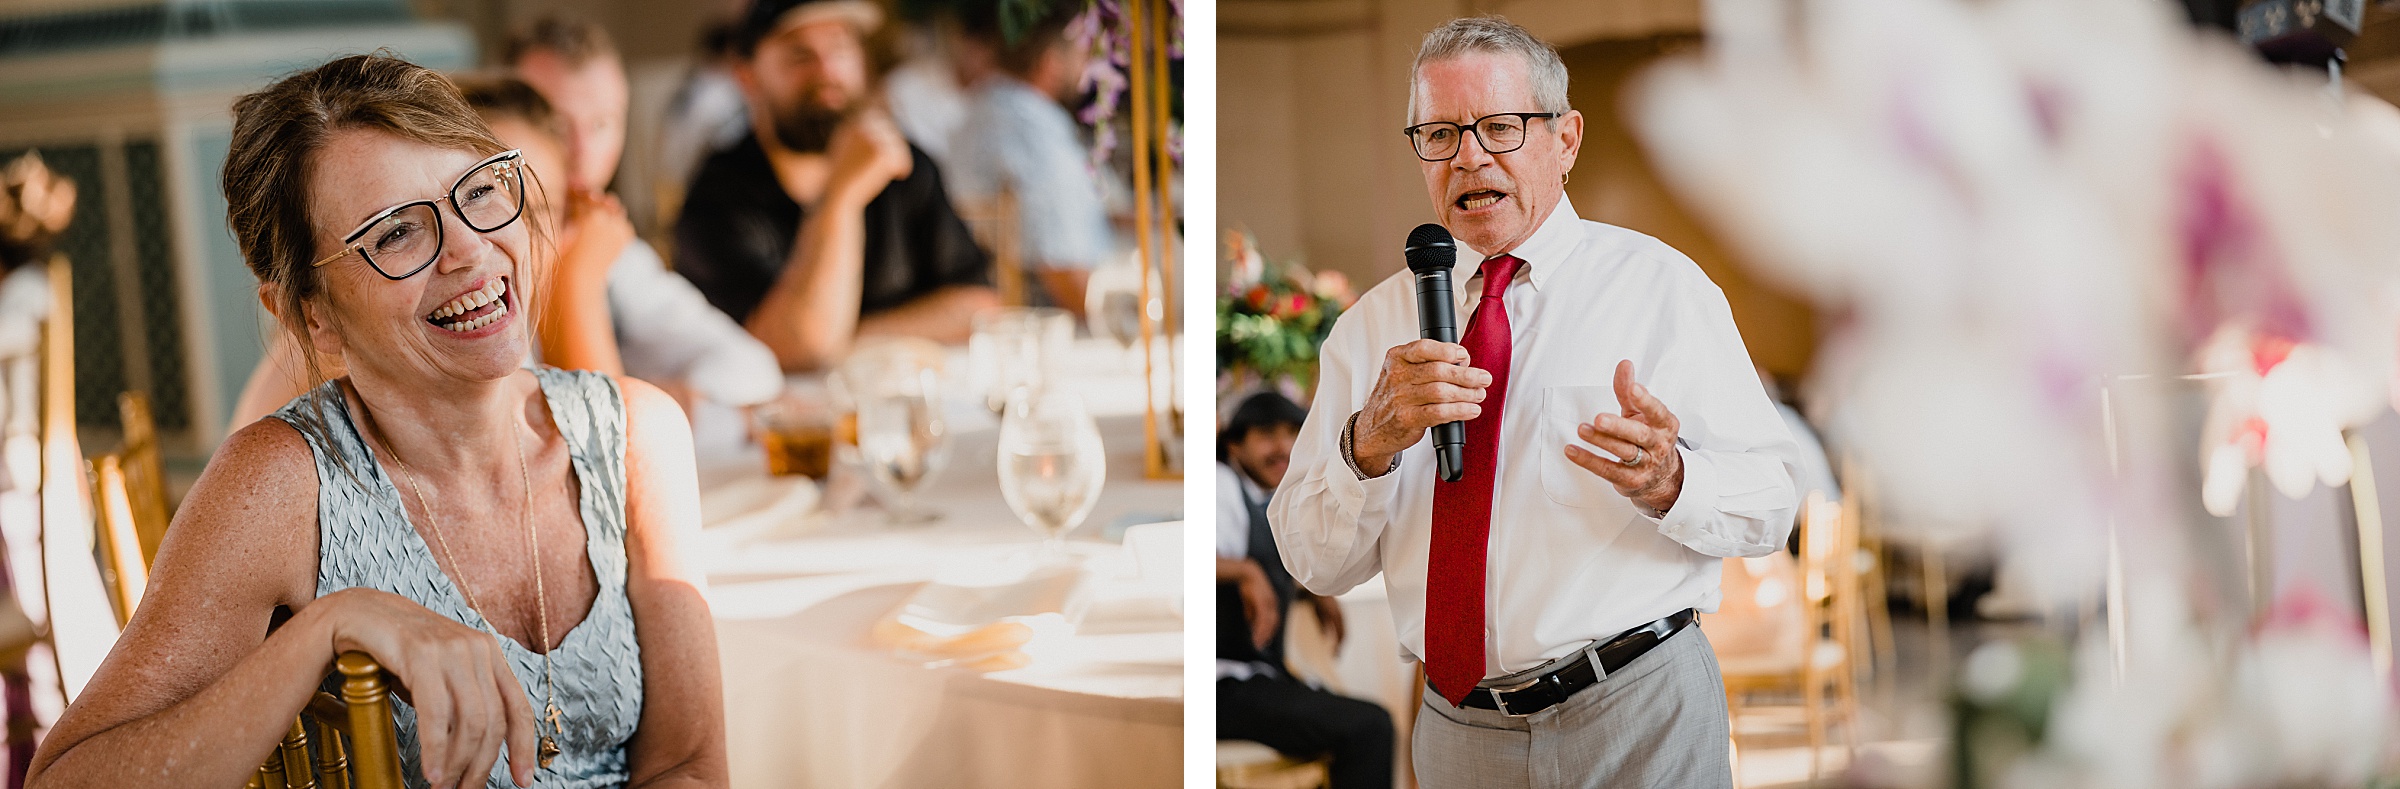 Groom's uncle makes a heartfelt speech during a wedding at the Union Station in Joliet, Illinois.